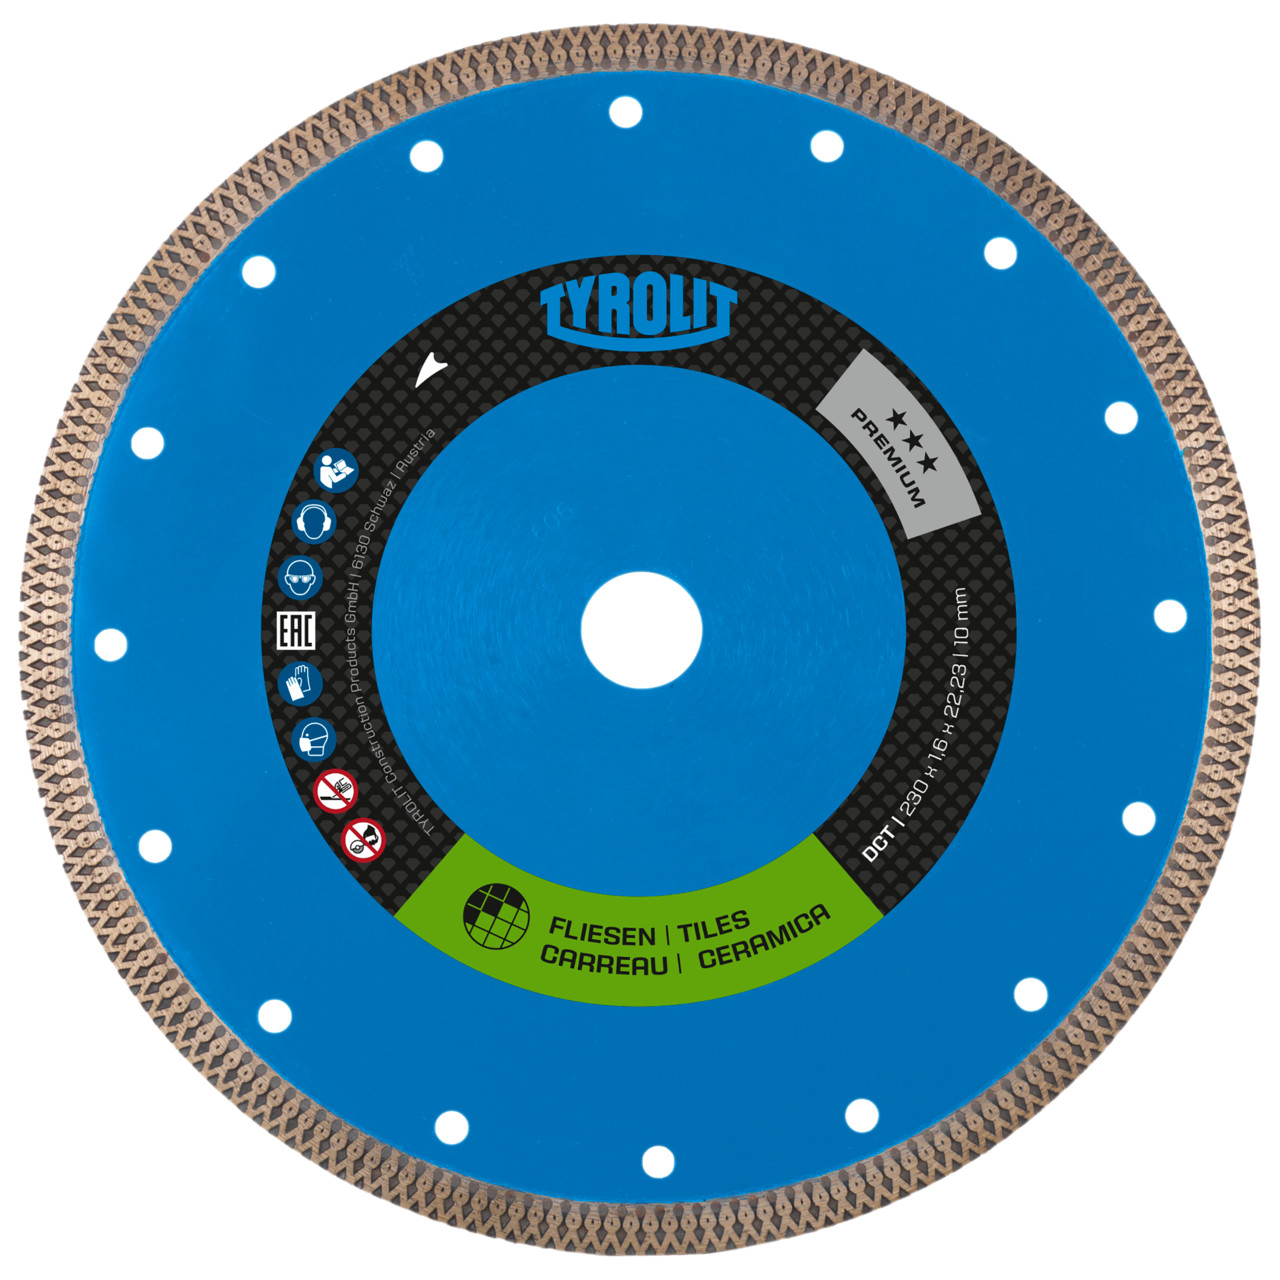 Tyrolit Dry-cutting saw blades DxDxH 200x1.6x22.23 DCT, shape: 1A1R (cutting disc with continuous cutting wheel), Art. 676791